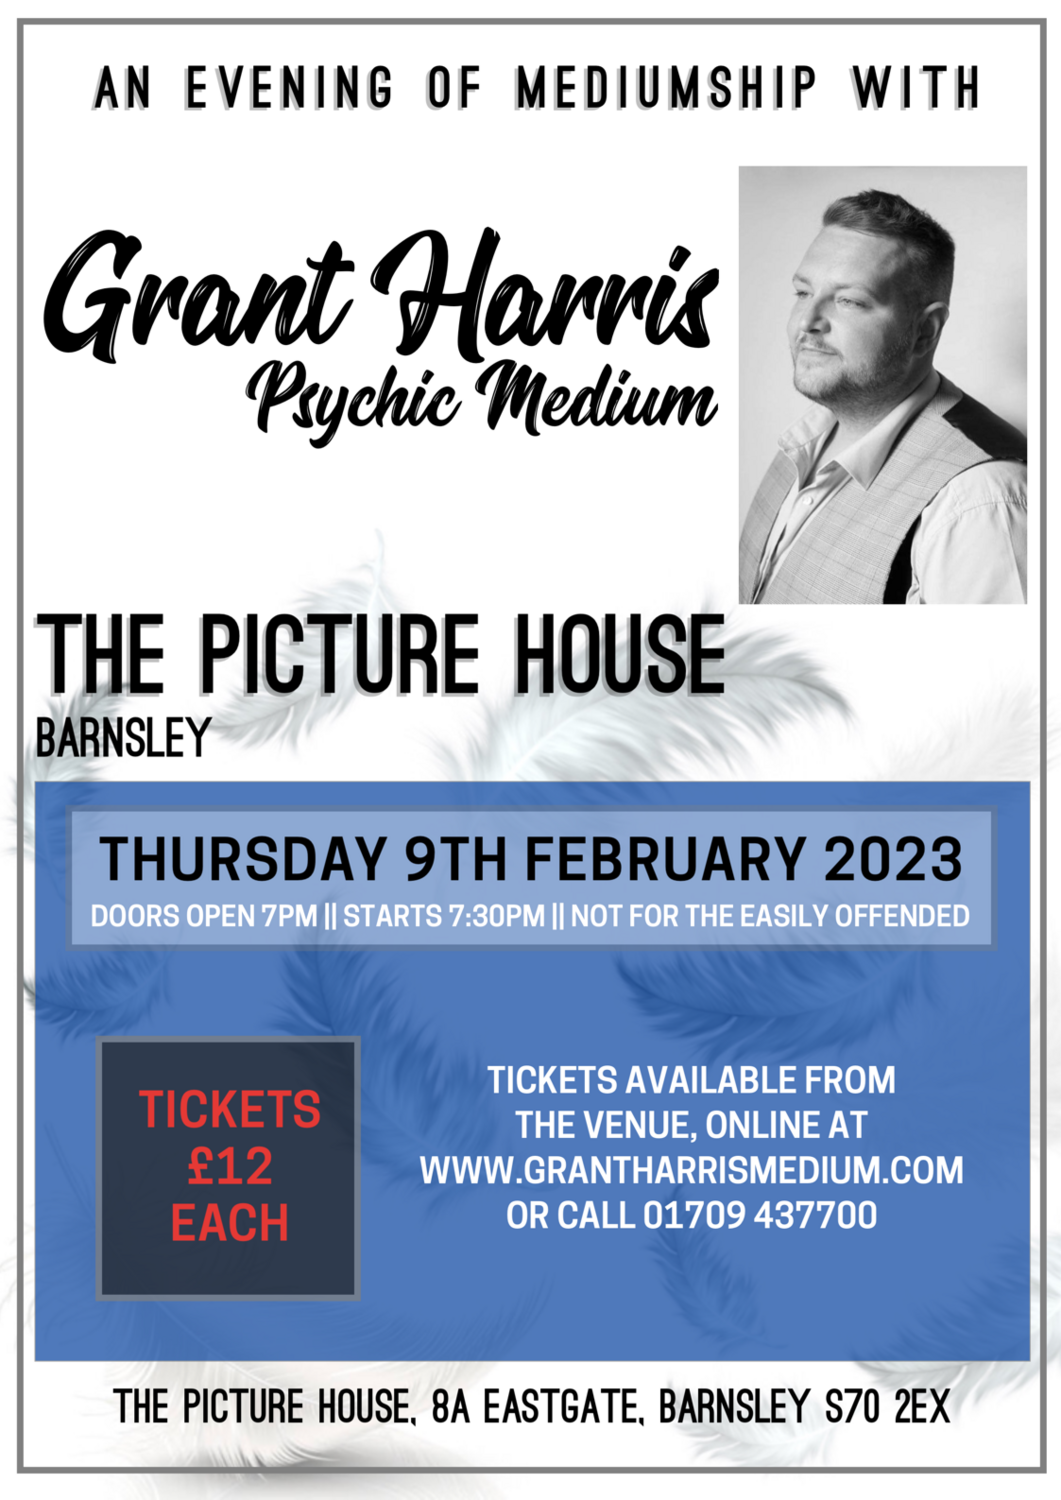 The Picture House, Barnsley, Thursday 9th February 2023